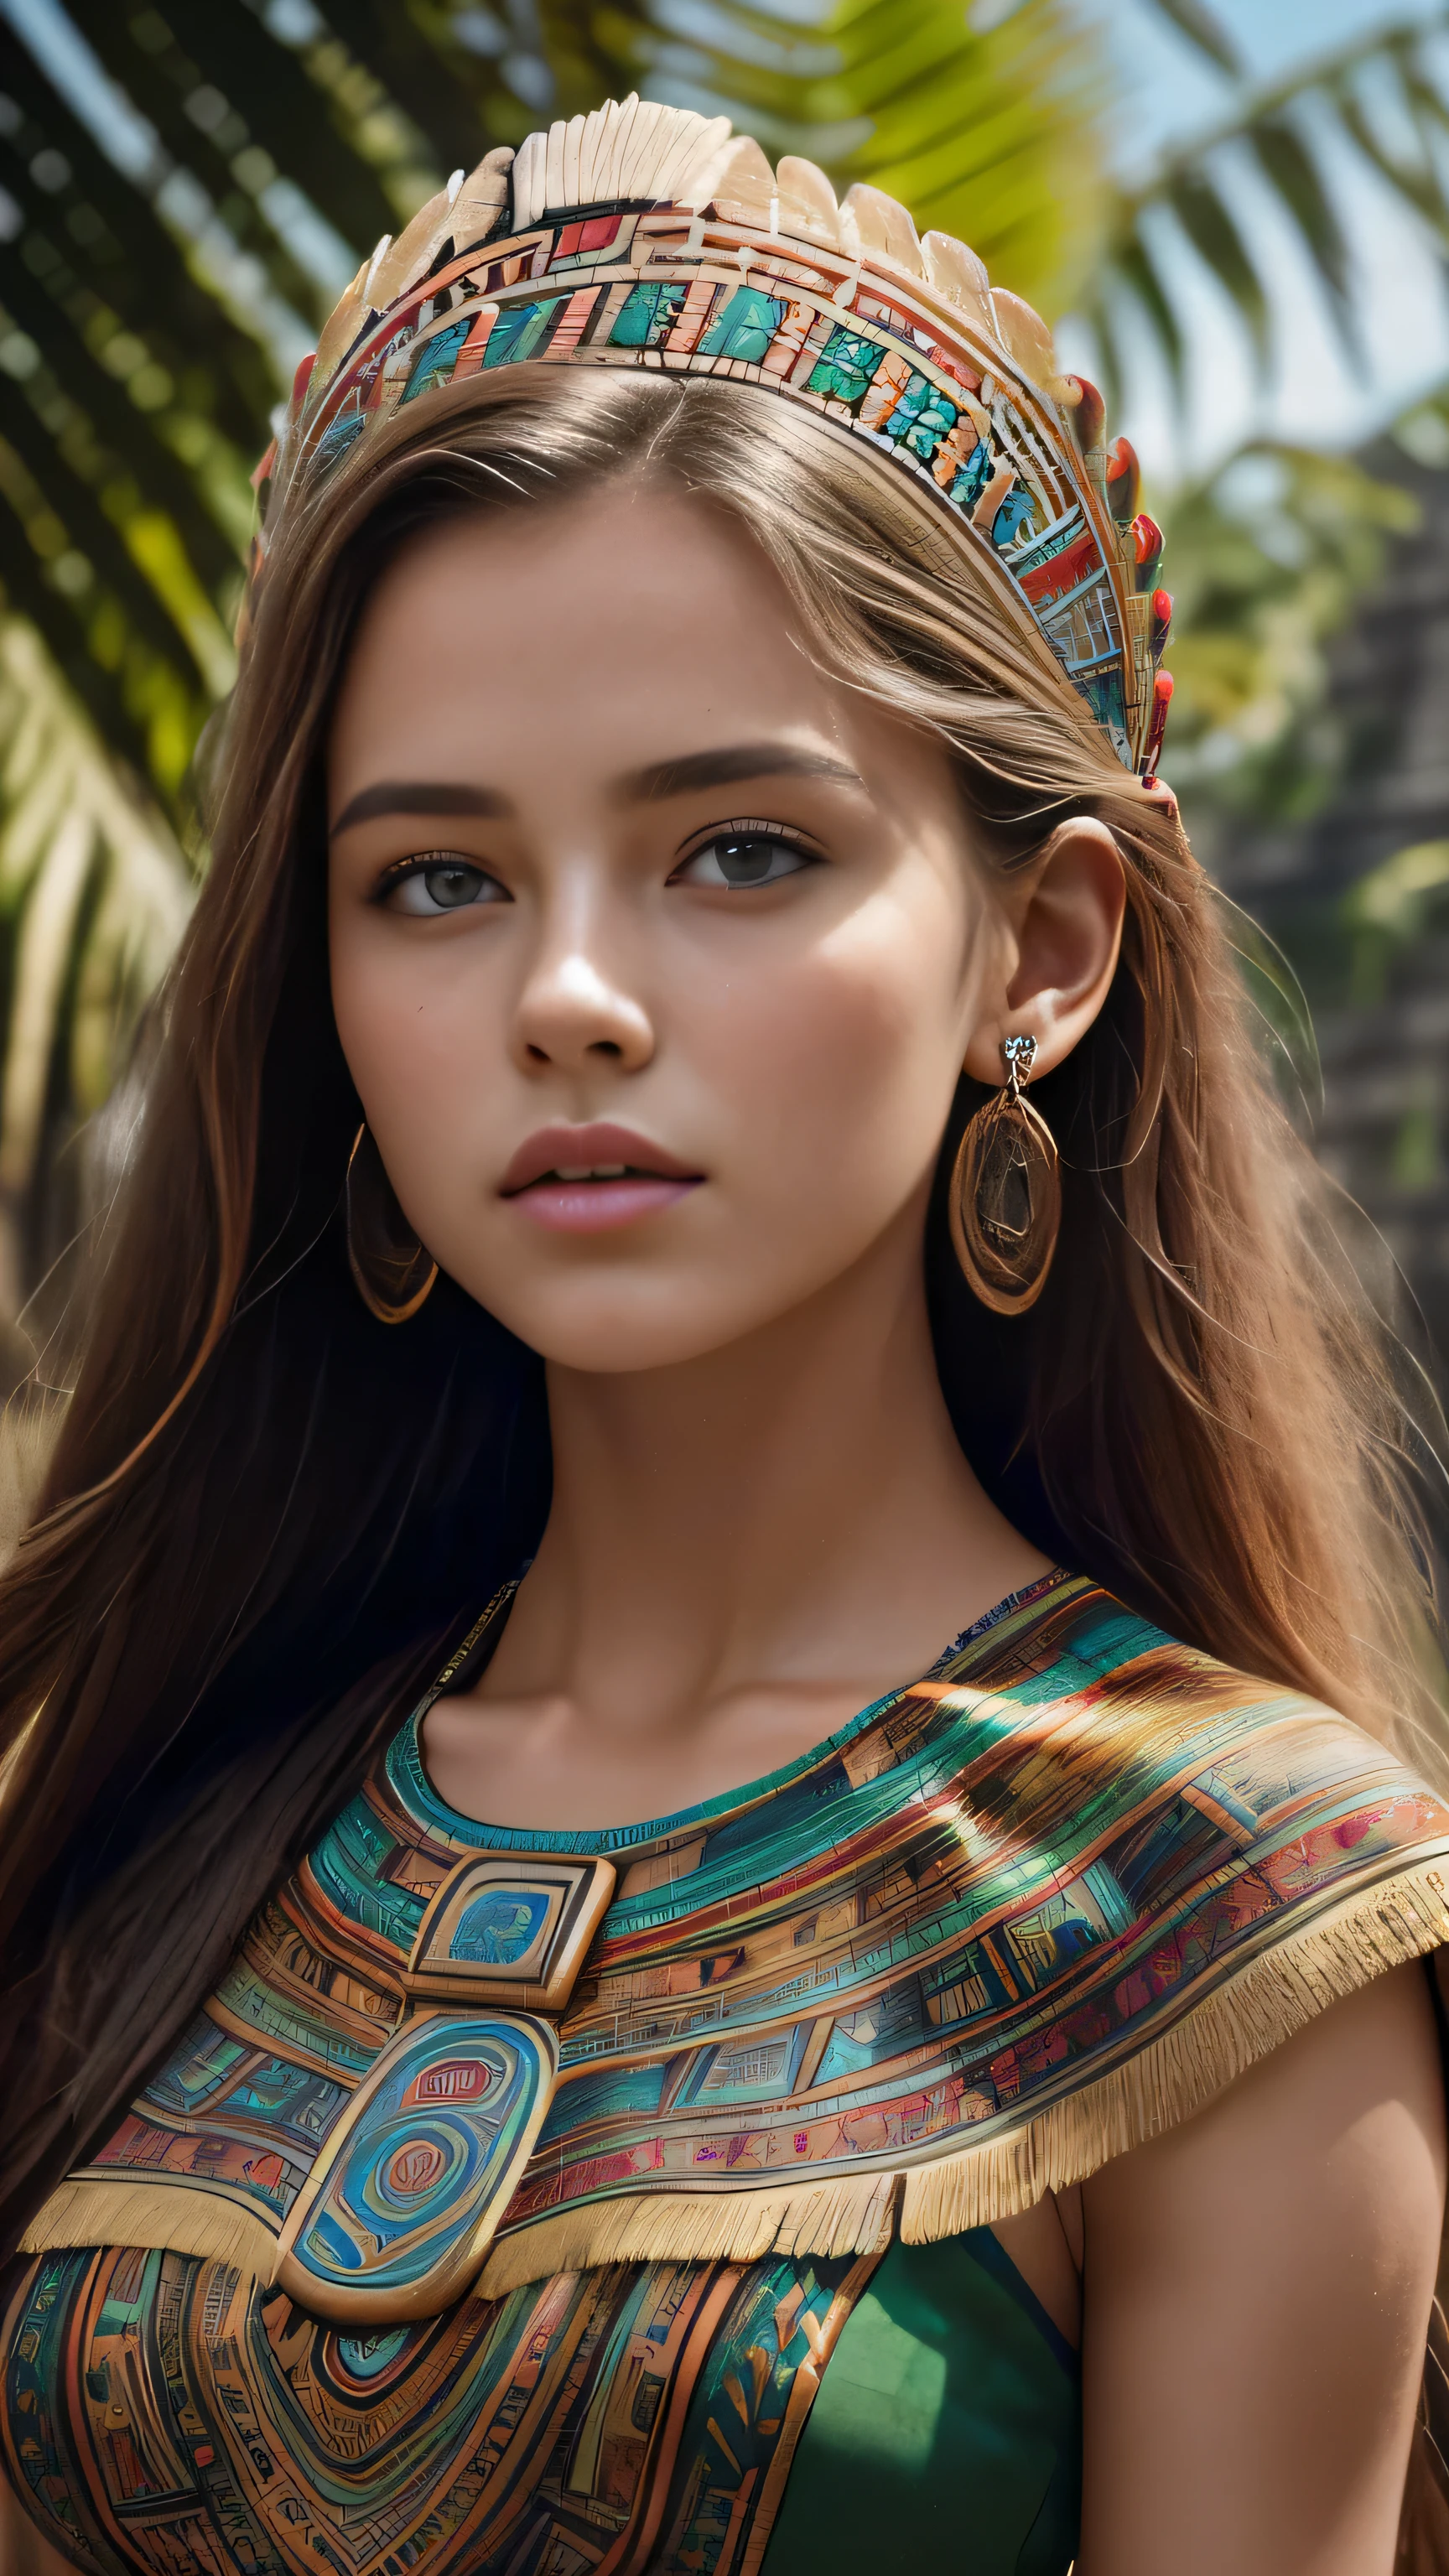 (cinematic photograph of a detailed beautiful 18-year old woman with ((facial and body characteristics that is similar to Kristina Pimenova))), (), ((Mayan Civilization Majesty: Theme: Ancient Mayan civilization aesthetics. Clothing: Vibrant, patterned garments inspired by Mayan art. Scene: Jungle ruins, a pyramid backdrop, or a Mayan cityscape. Props: Mayan jewelry, ceremonial headdress.)), (), (), finely detailed, ultra-realistic features of her pale skin and (slender and athletic body), and (symmetrical, realistic and beautiful face), candid, (), (), (()), (), film stock photograph,  rich colors, hyper realistic, lifelike texture, dramatic lighting, strong contrast